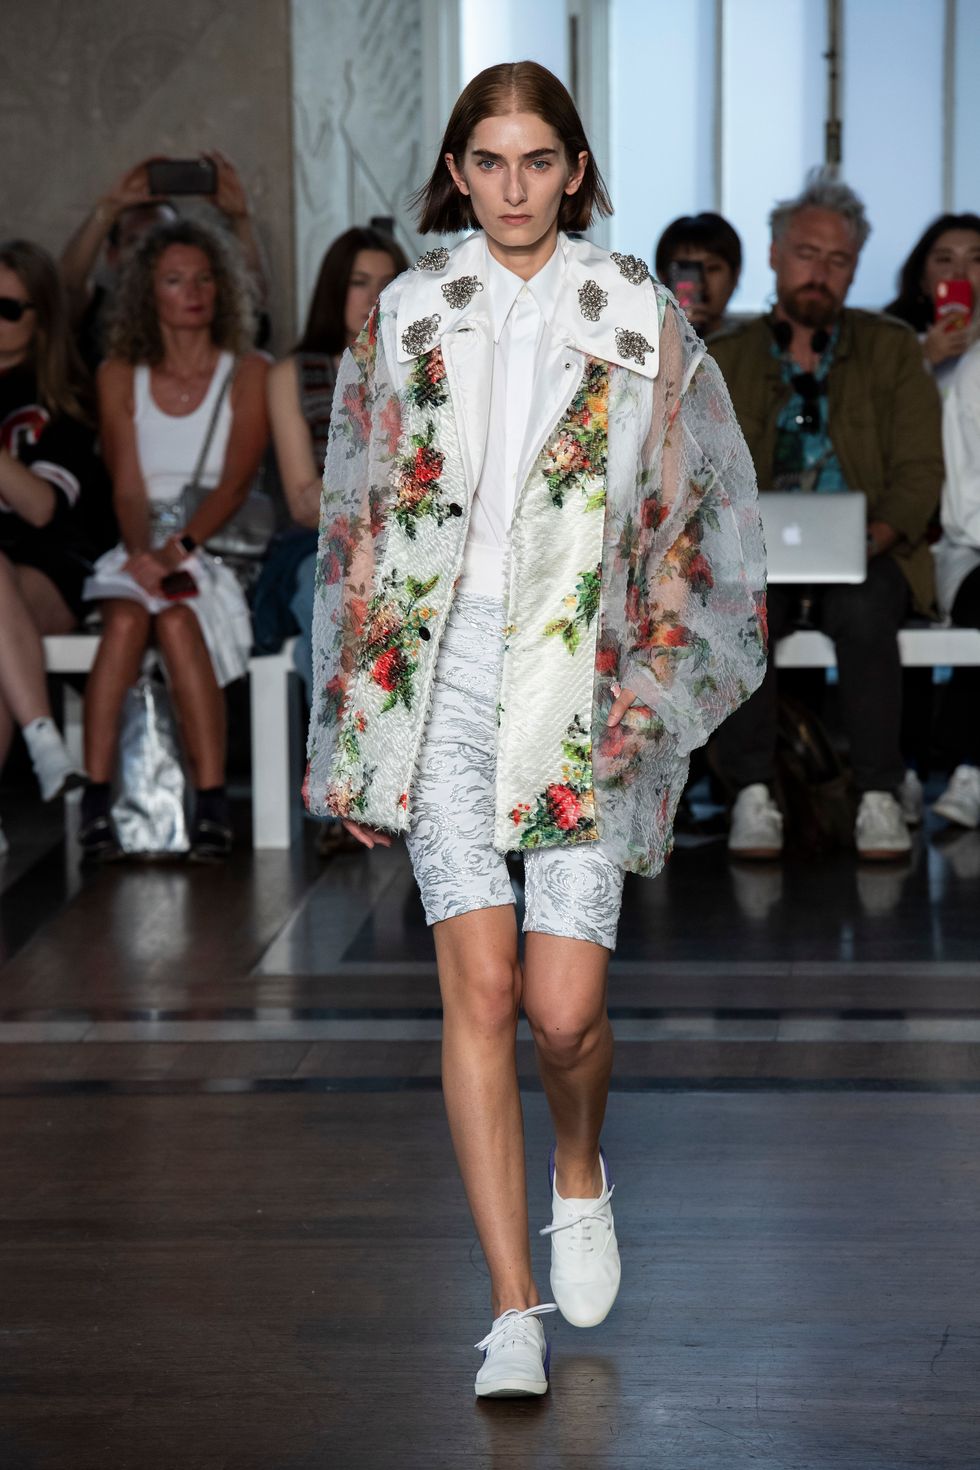 The 10 Biggest London Fashion Week Trends for Spring 2020 - PAPER